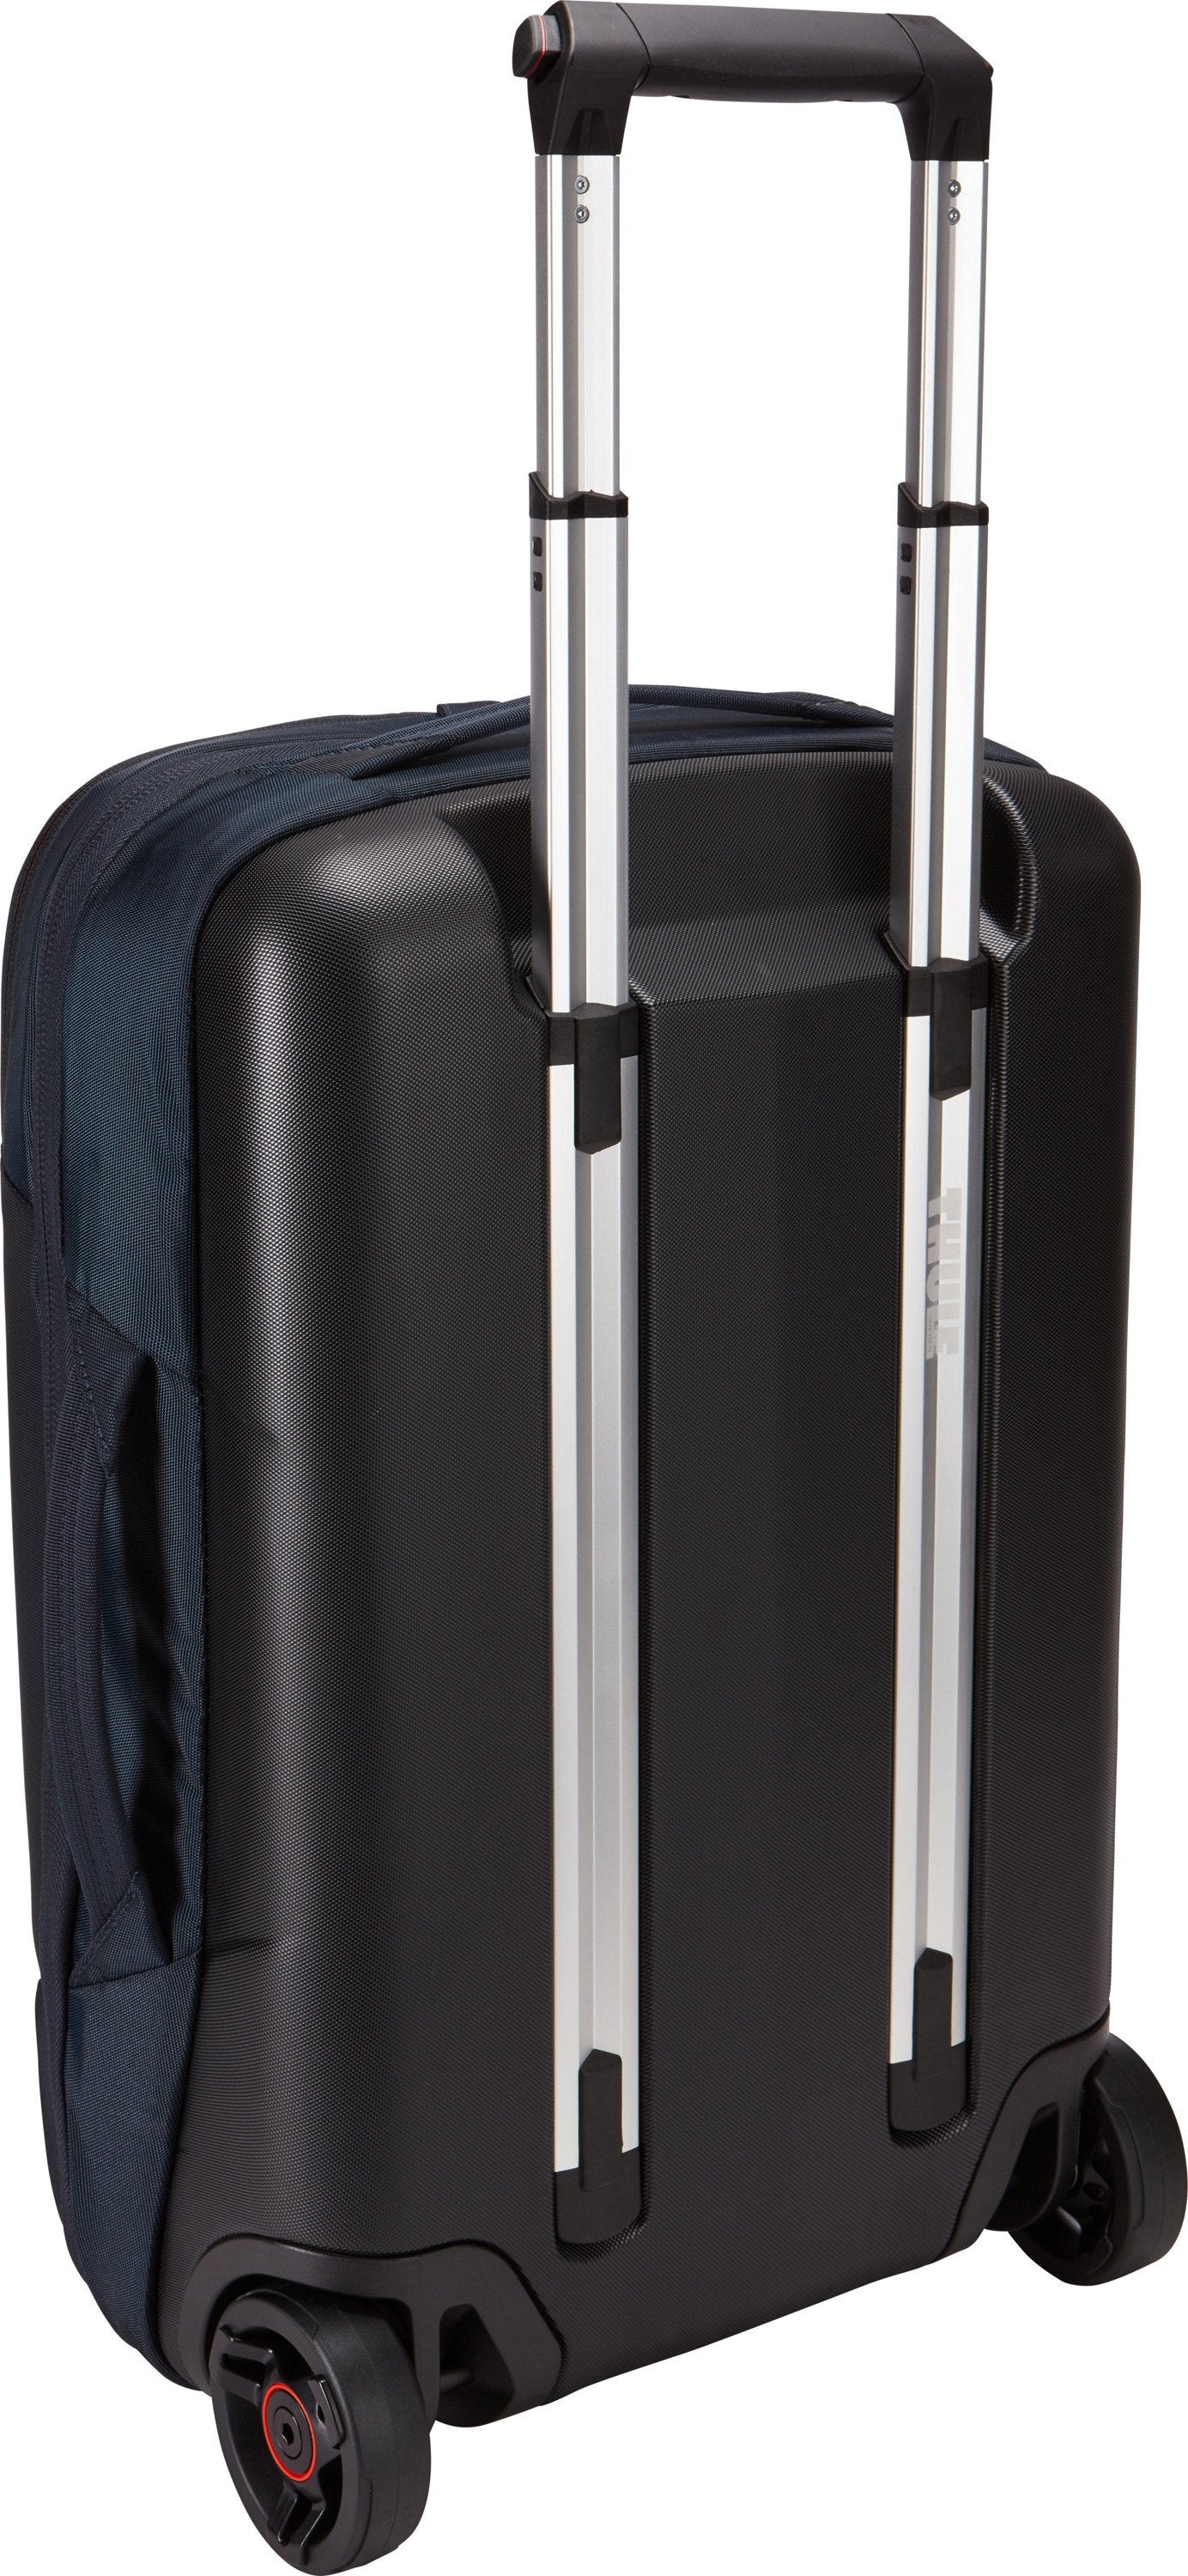 Thule Subterra 22 Inch Carry-On Luggage